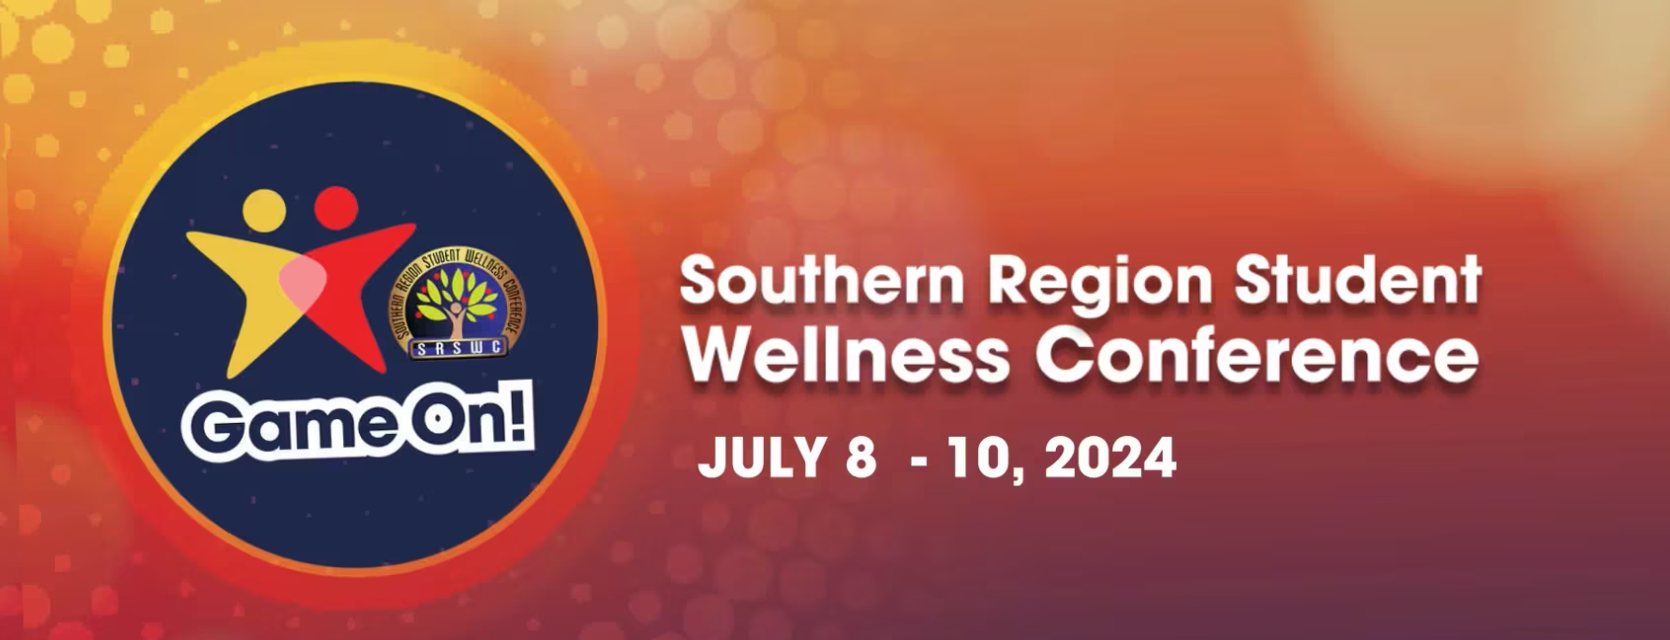 Southern Region Student Wellness Conference. Game On logo. July 8-10, 2024